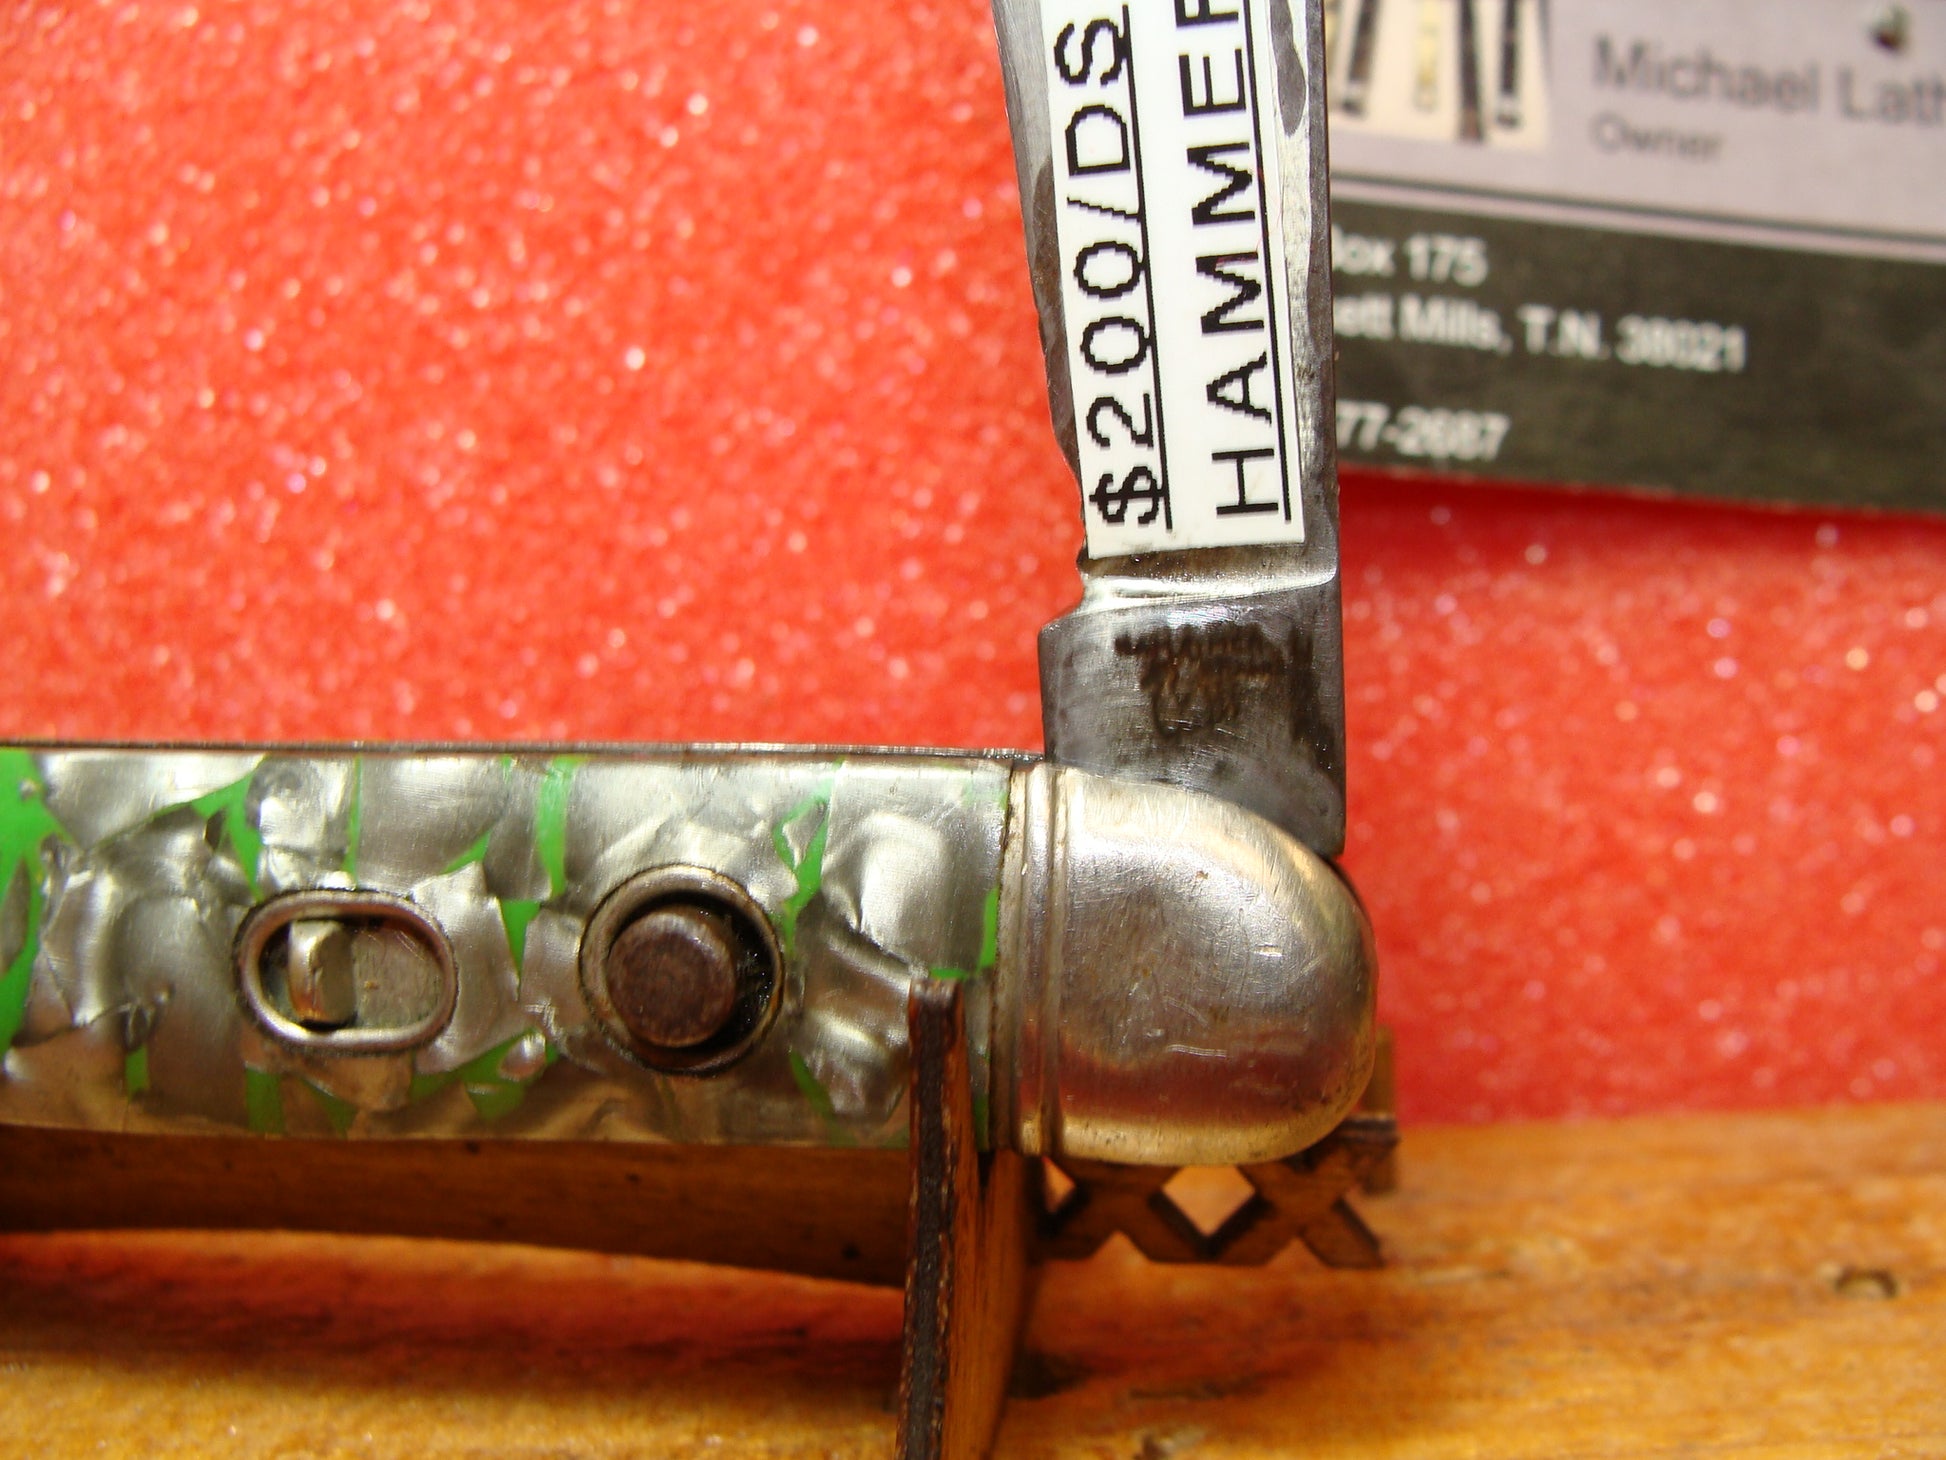 HAMMER BRAND IMPERIAL CUT 1945-55 VINTAGE AMERICAN AUTOMATIC KNIFE